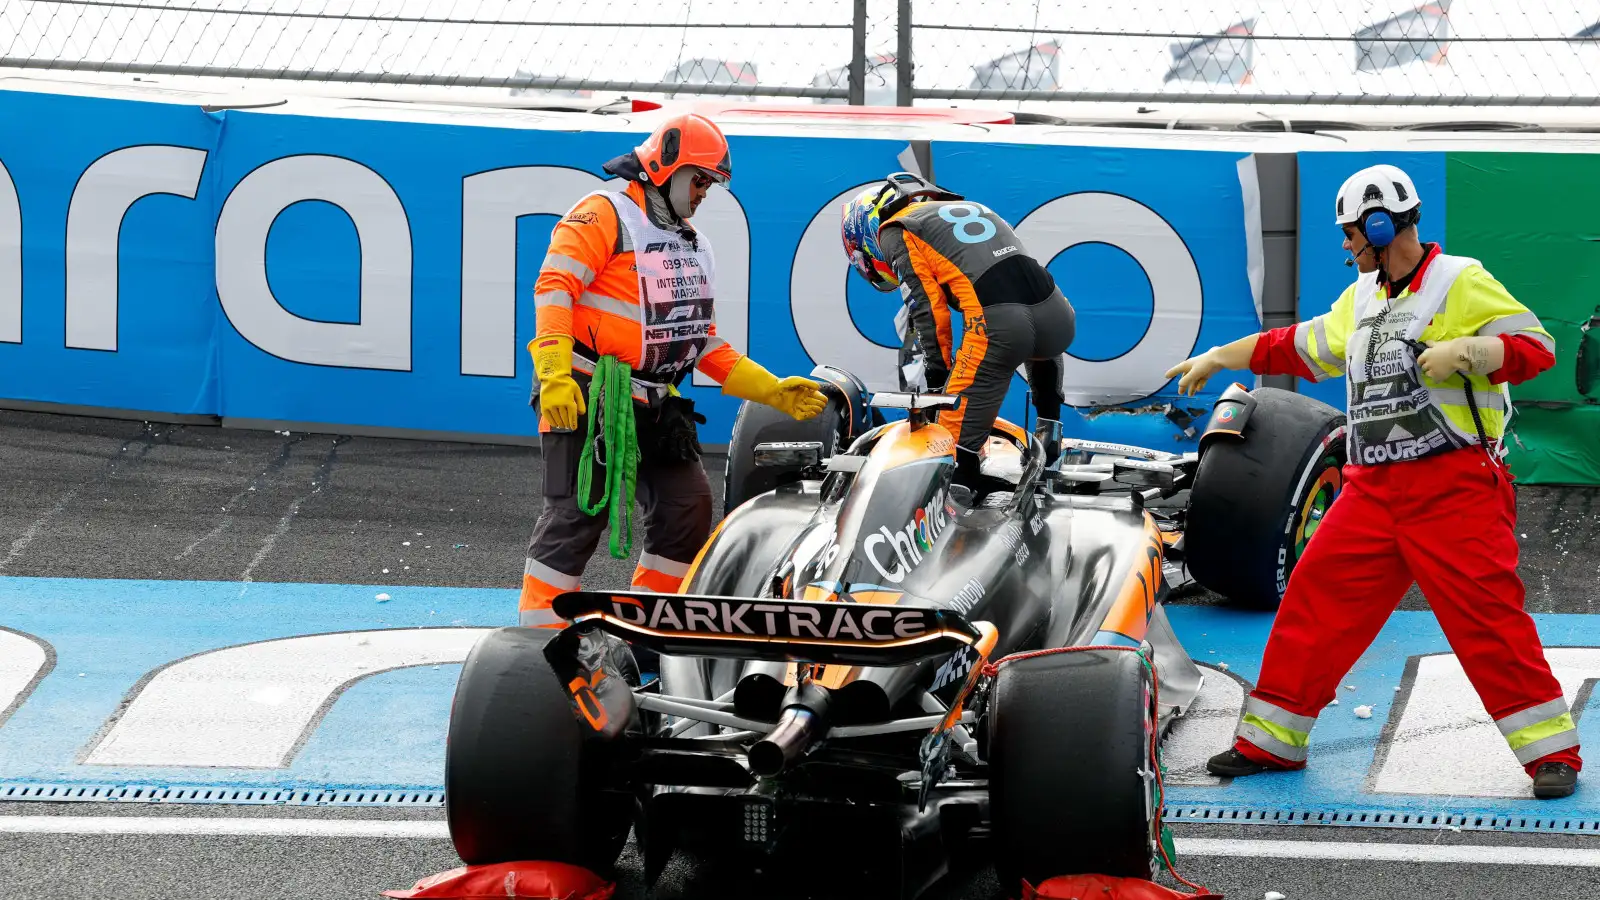 Oscar Piastri climbs from his McLaren after crashing in practice for the Dutch Grand Prix at Turn 3.